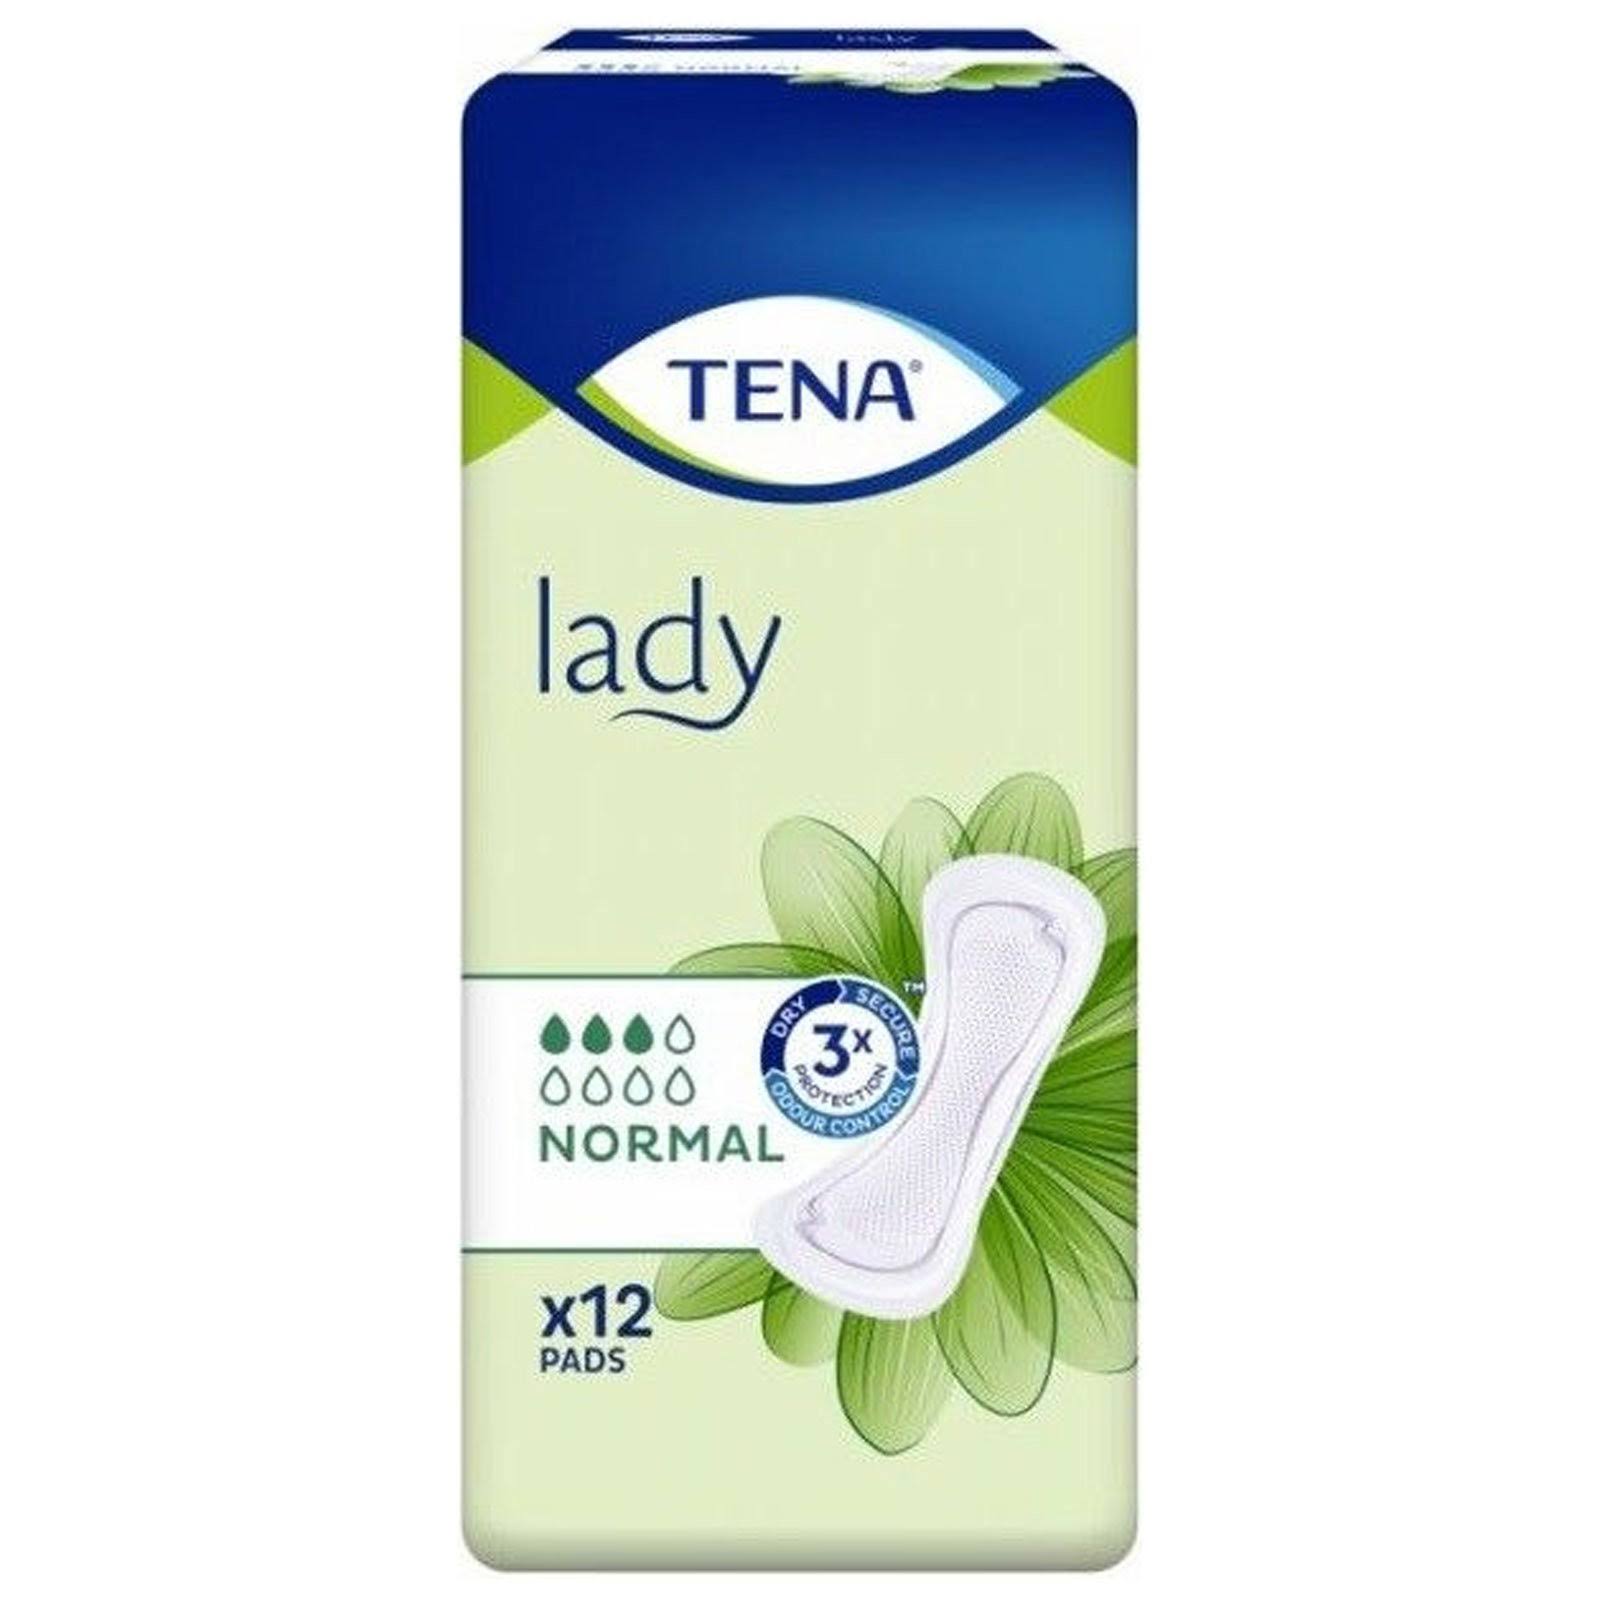 TENA Lady Normal 12 Pads